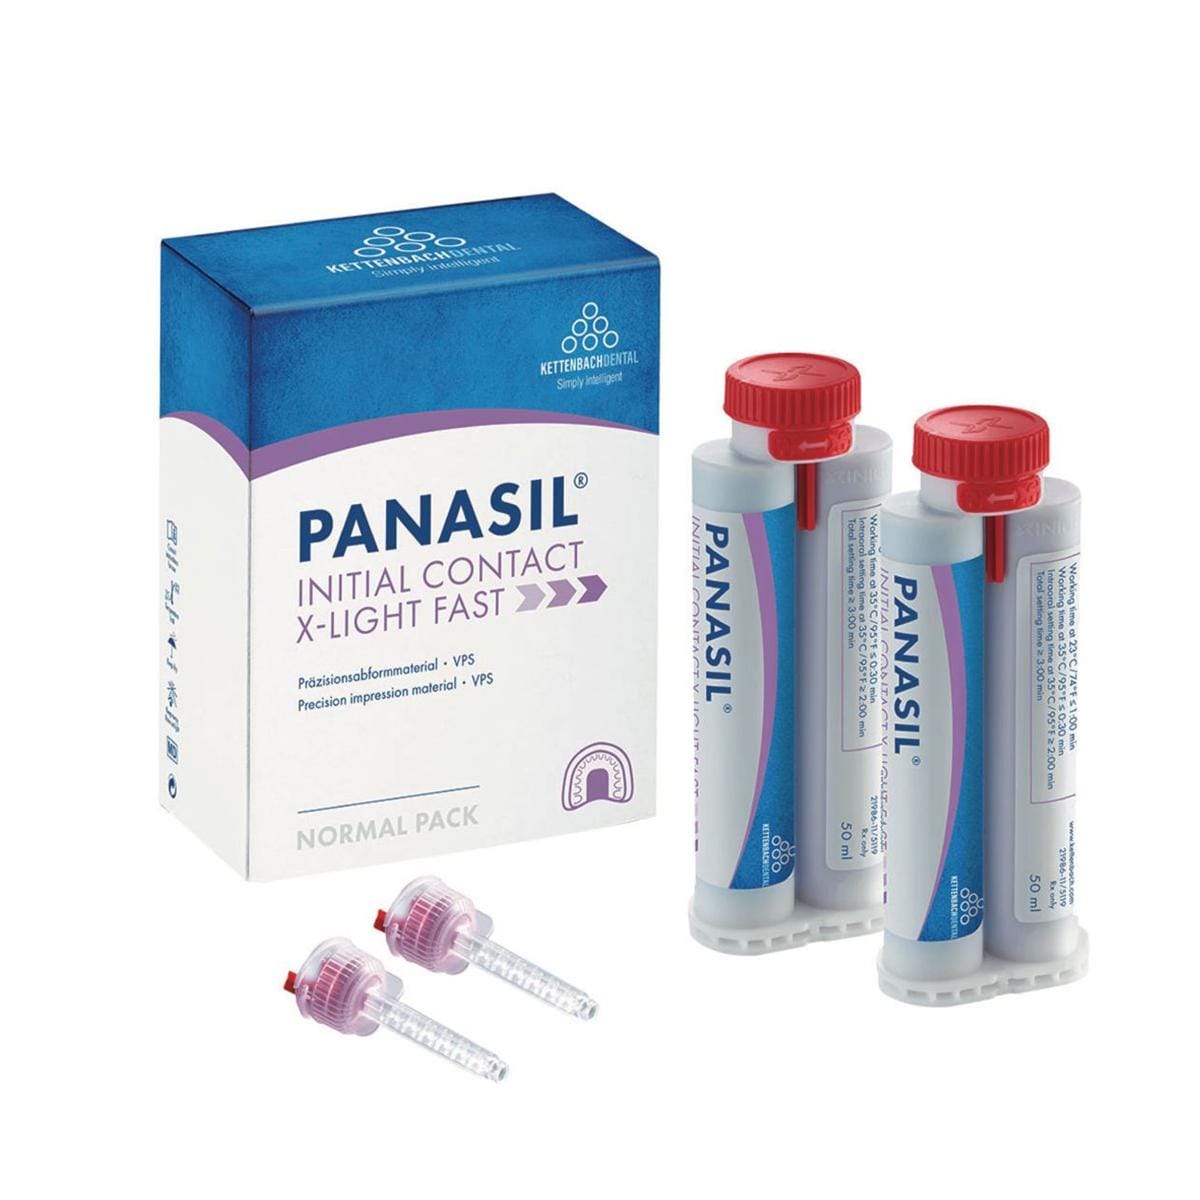 Panasil initial contact X-Light Fast Normal pack